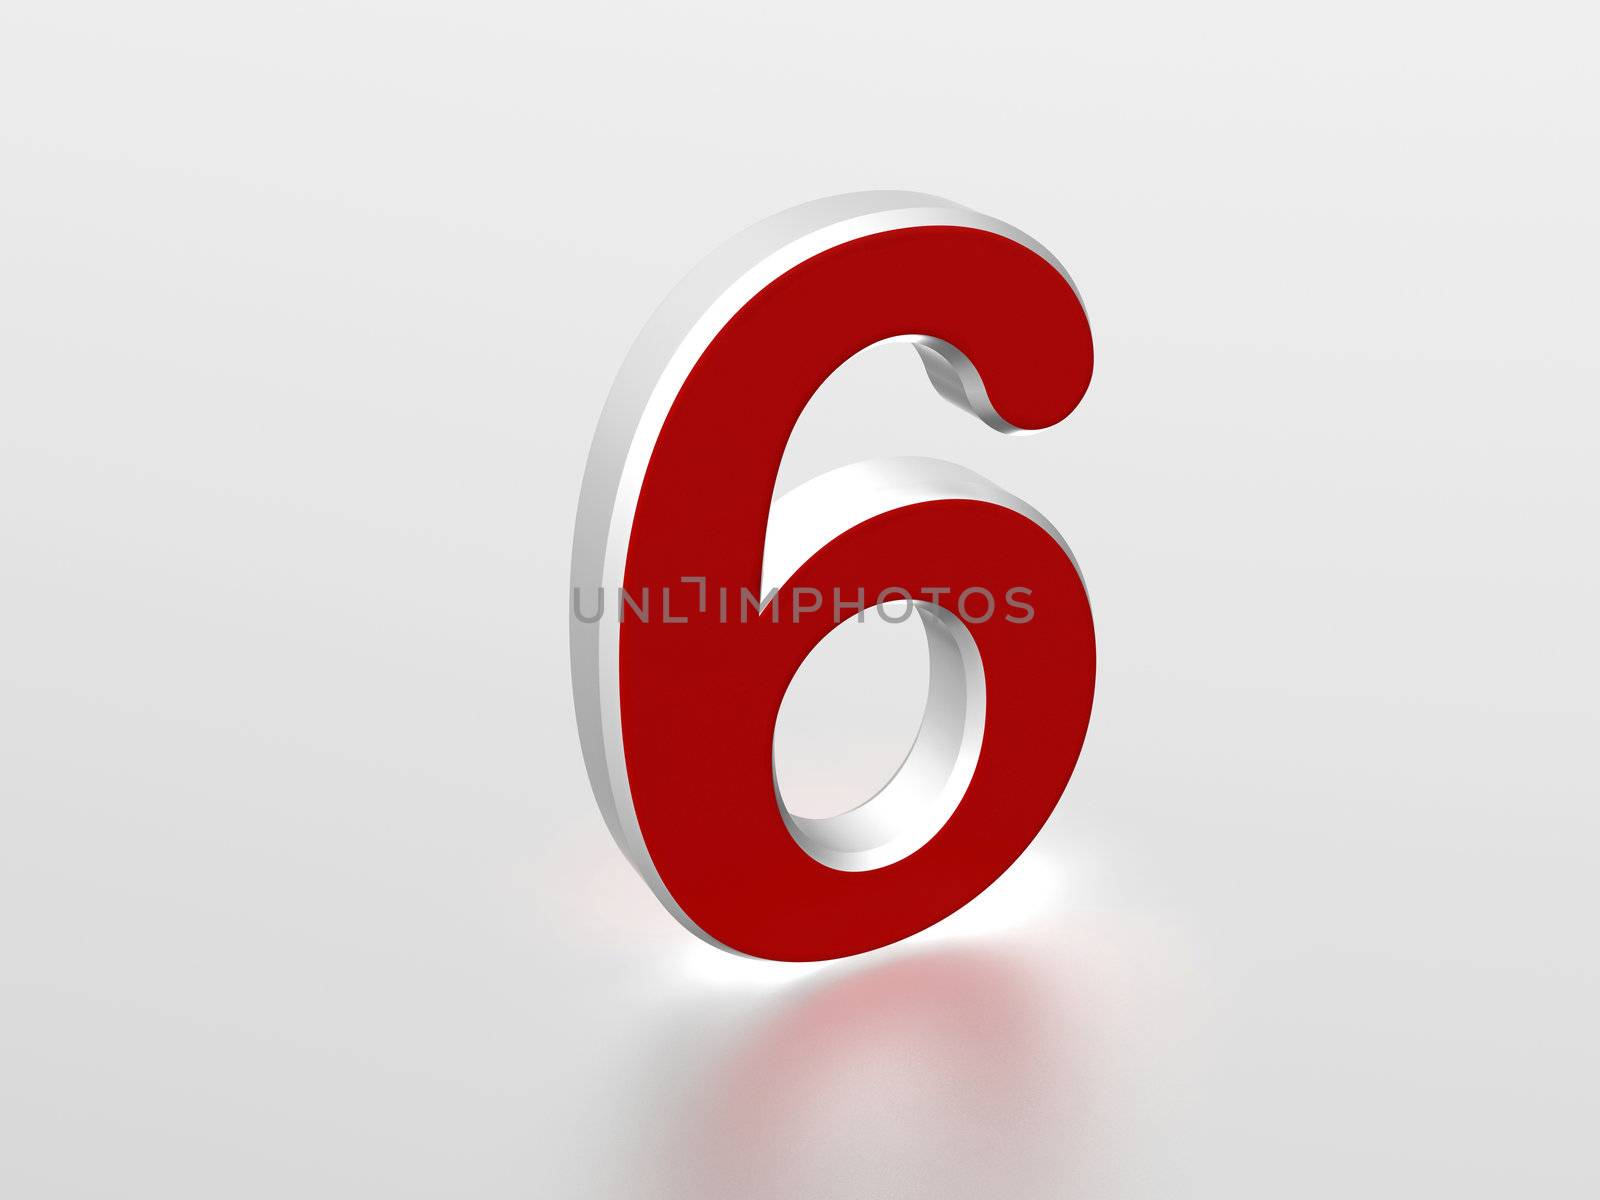 The number 6 - computer generated image